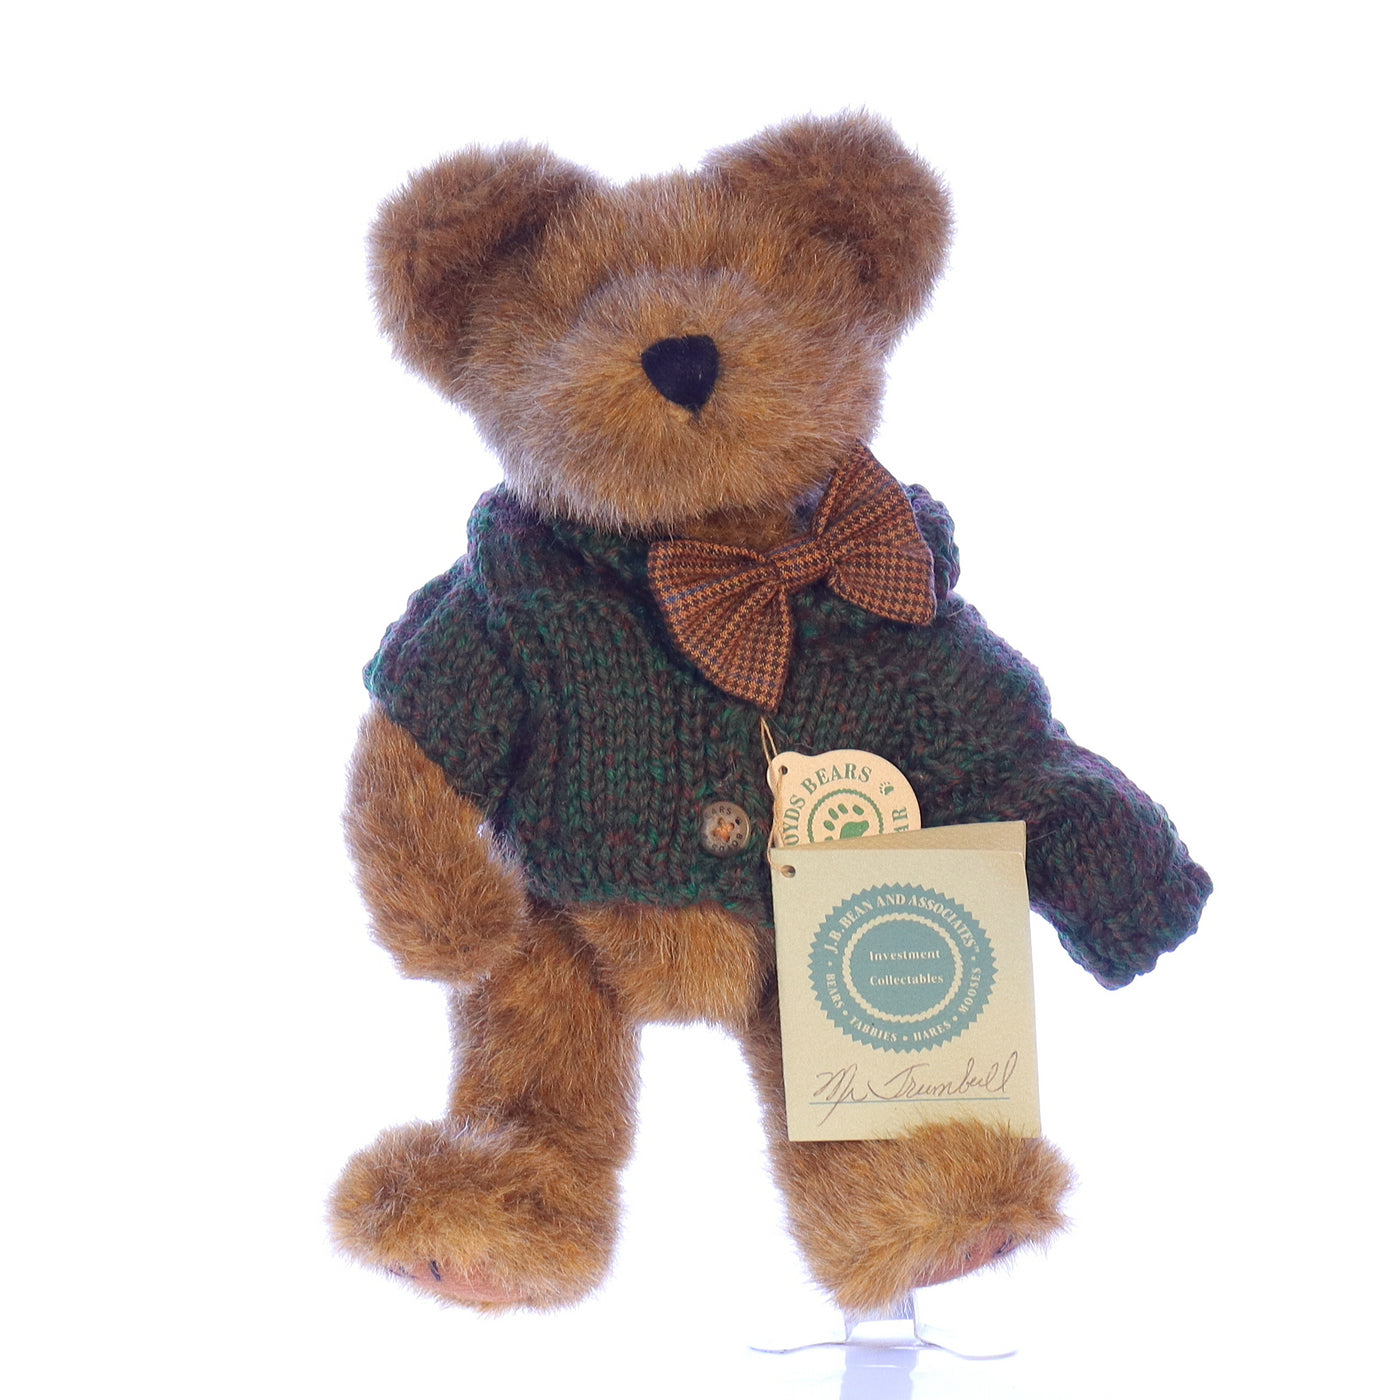 Boyds_Bears_and_Friends_Mr_Trumbull_JB_Bean_and_Associates_Stuffed_Animal_1985 Front View